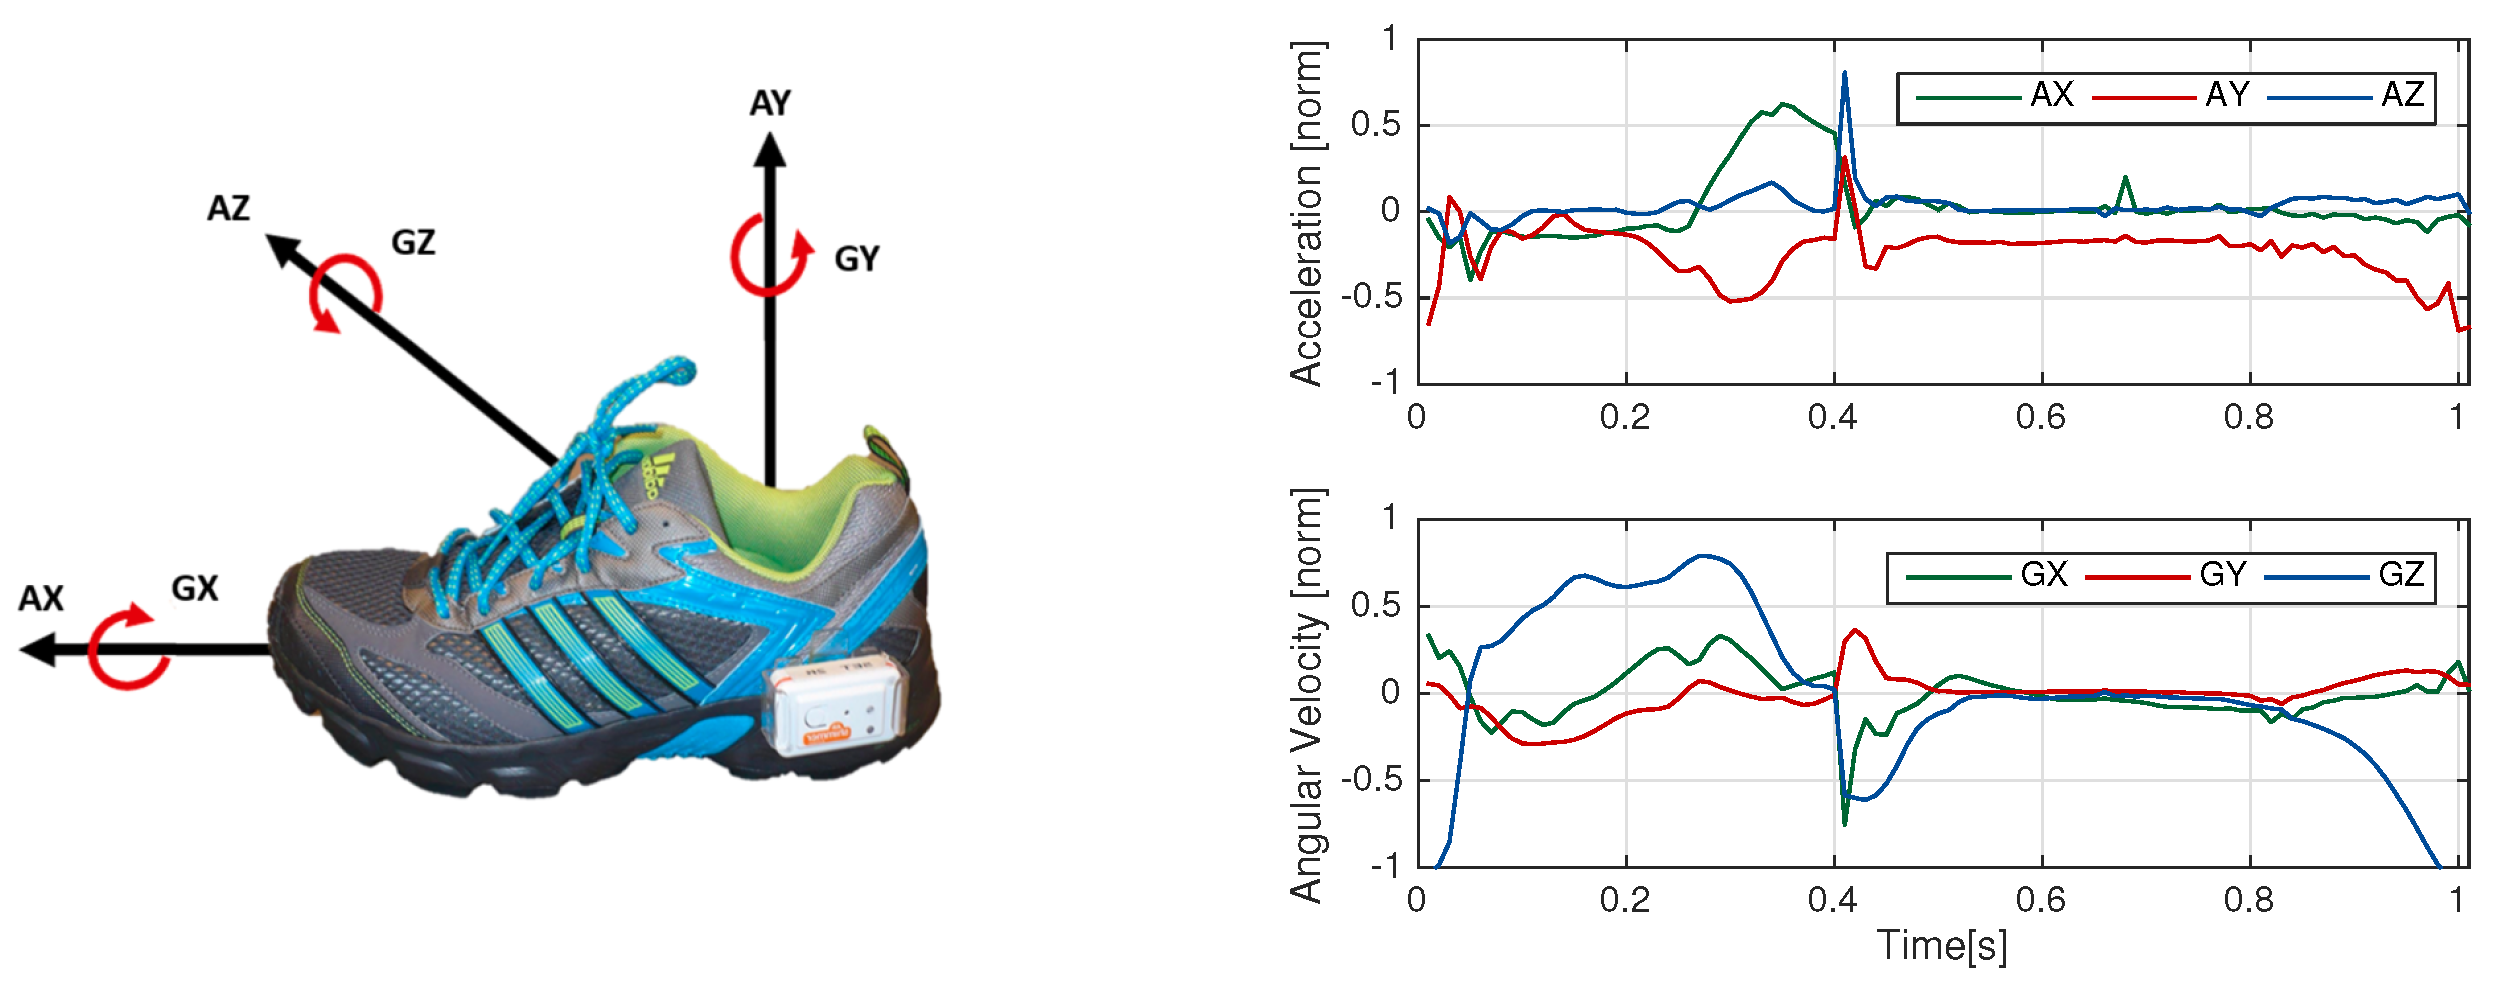 Sensors | Free Full-Text | Segmentation of Gait Sequences in Sensor-Based  Movement Analysis: A Comparison of Methods in Parkinson's Disease | HTML